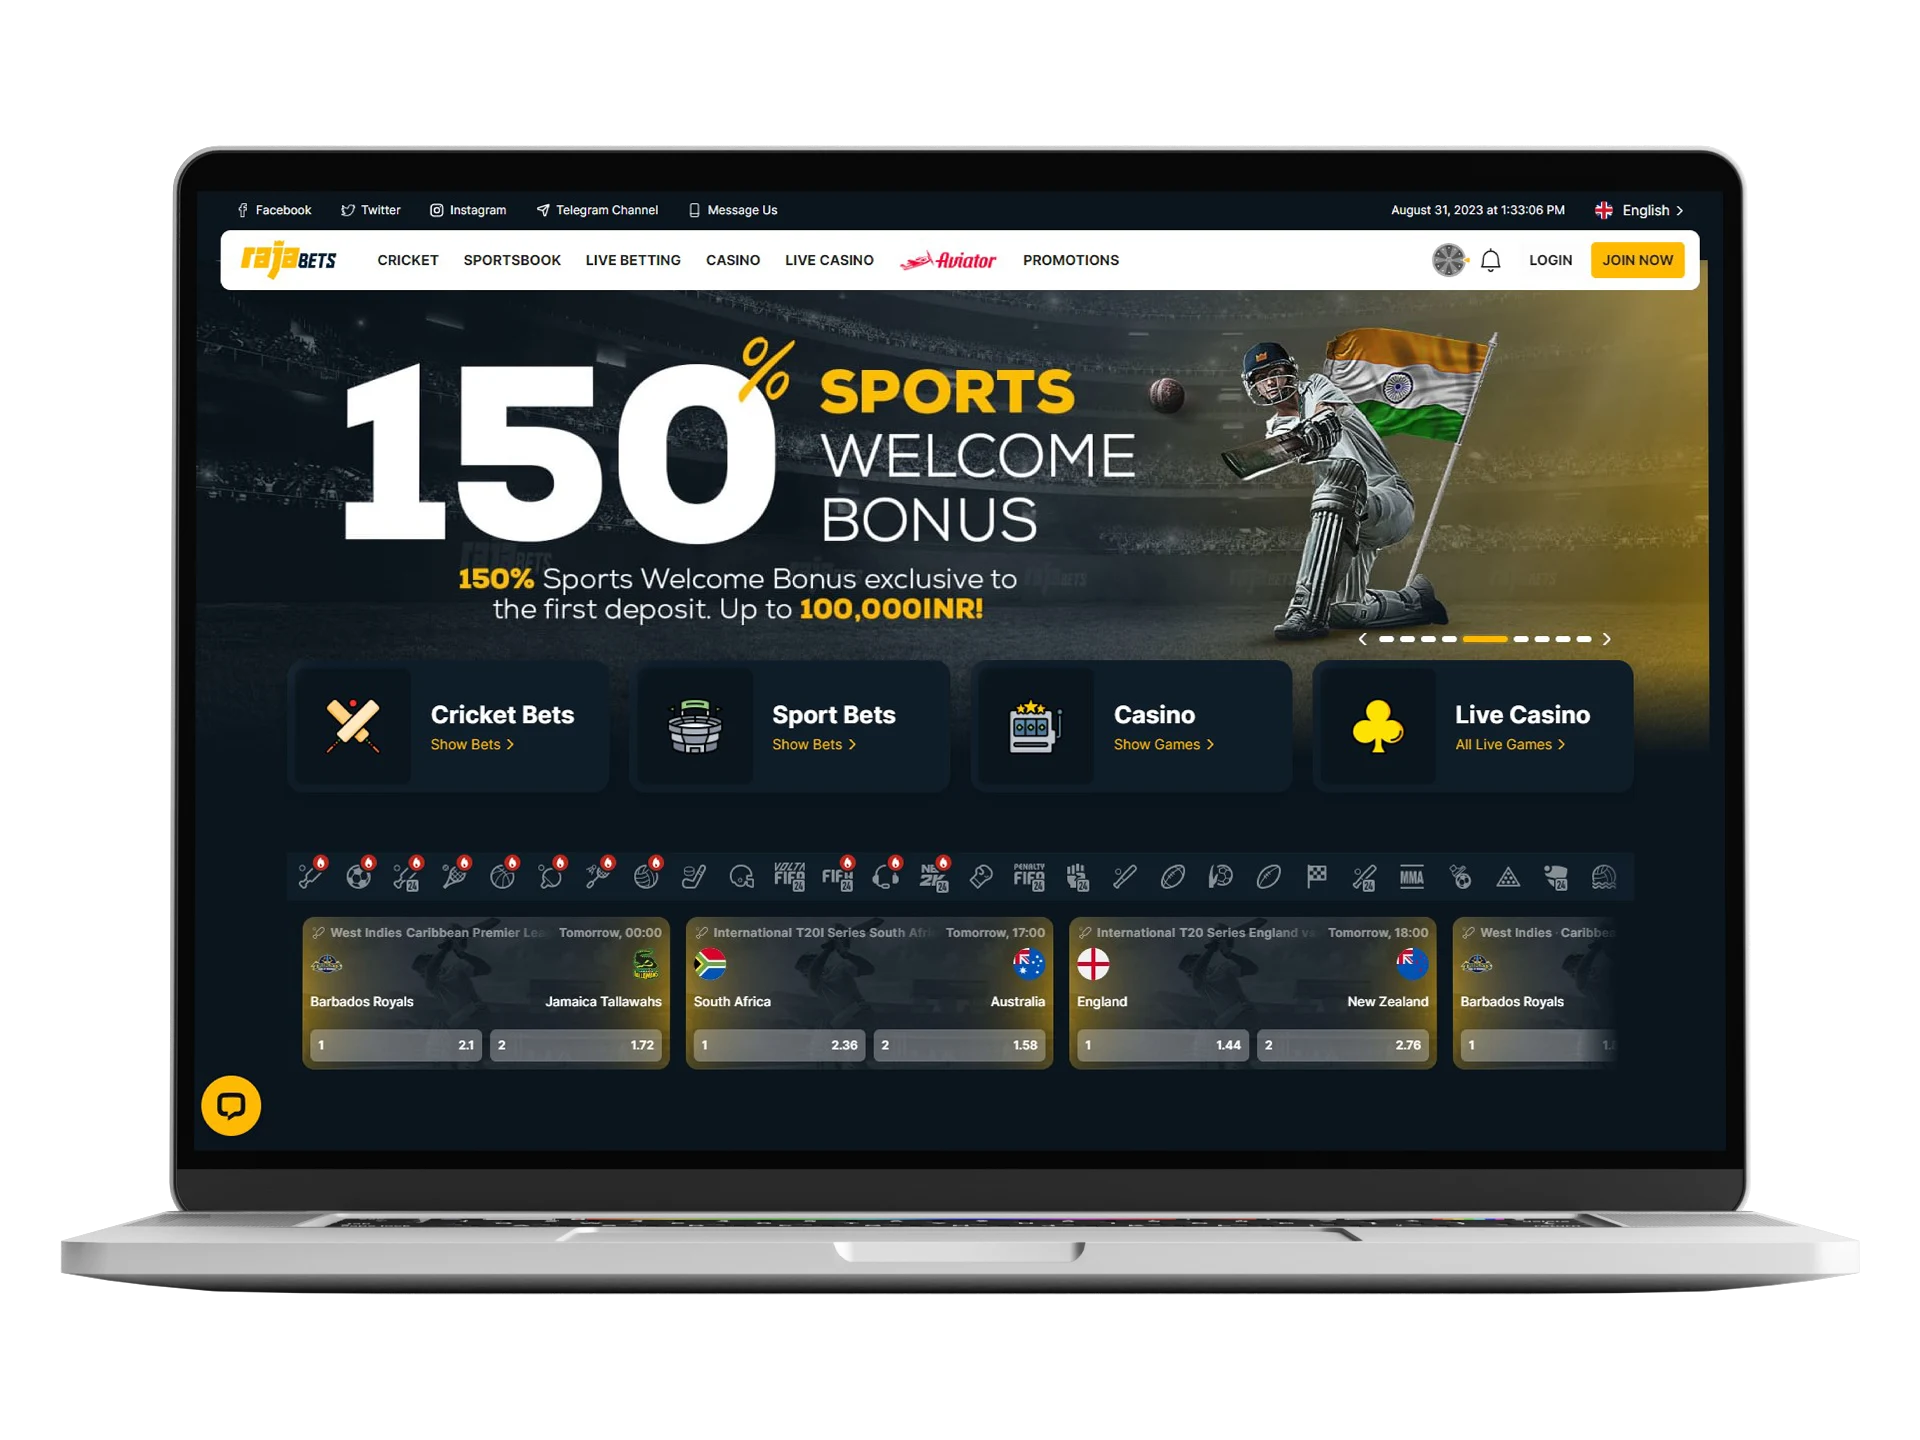 Rajabets provides various sports and sporting events, casino games, offers a generous bonus system, various payment methods and much more.